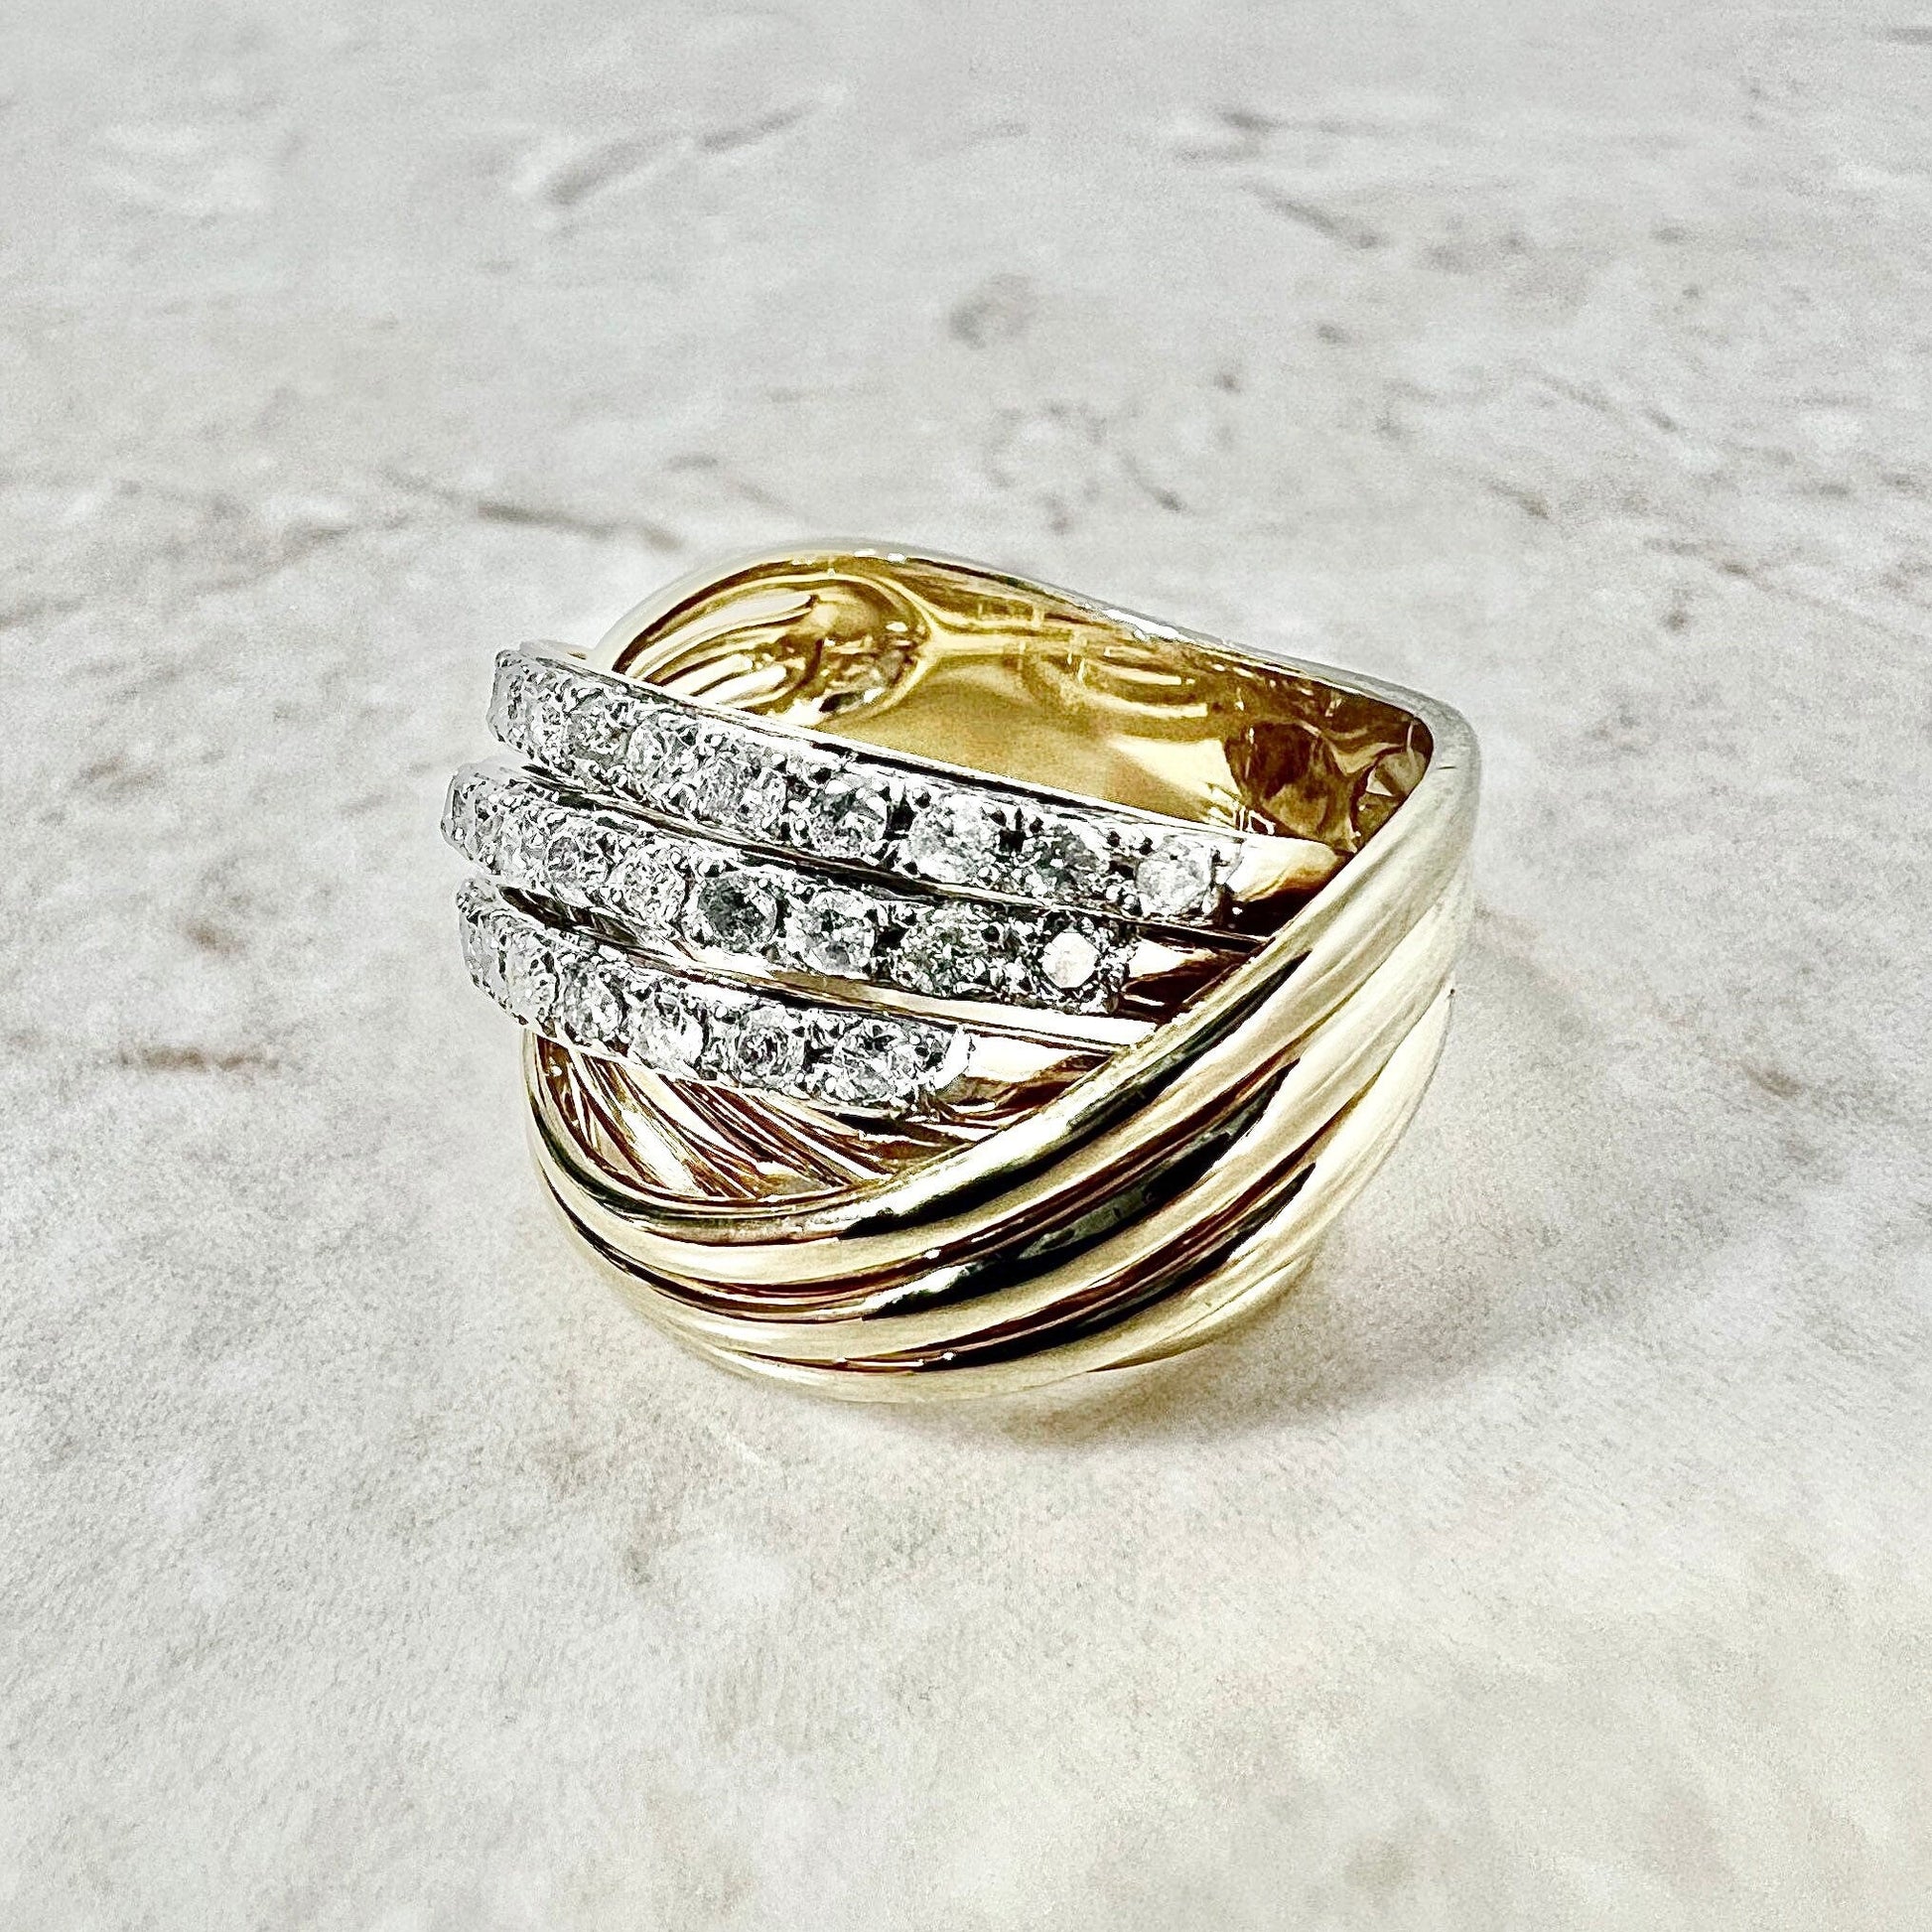 Vintage 14K Diamond Crossover Band Ring - 3 Row Yellow Gold Diamond Ring - Diamond Cocktail Ring - Two Tone Gold - Birthday Gift For Her